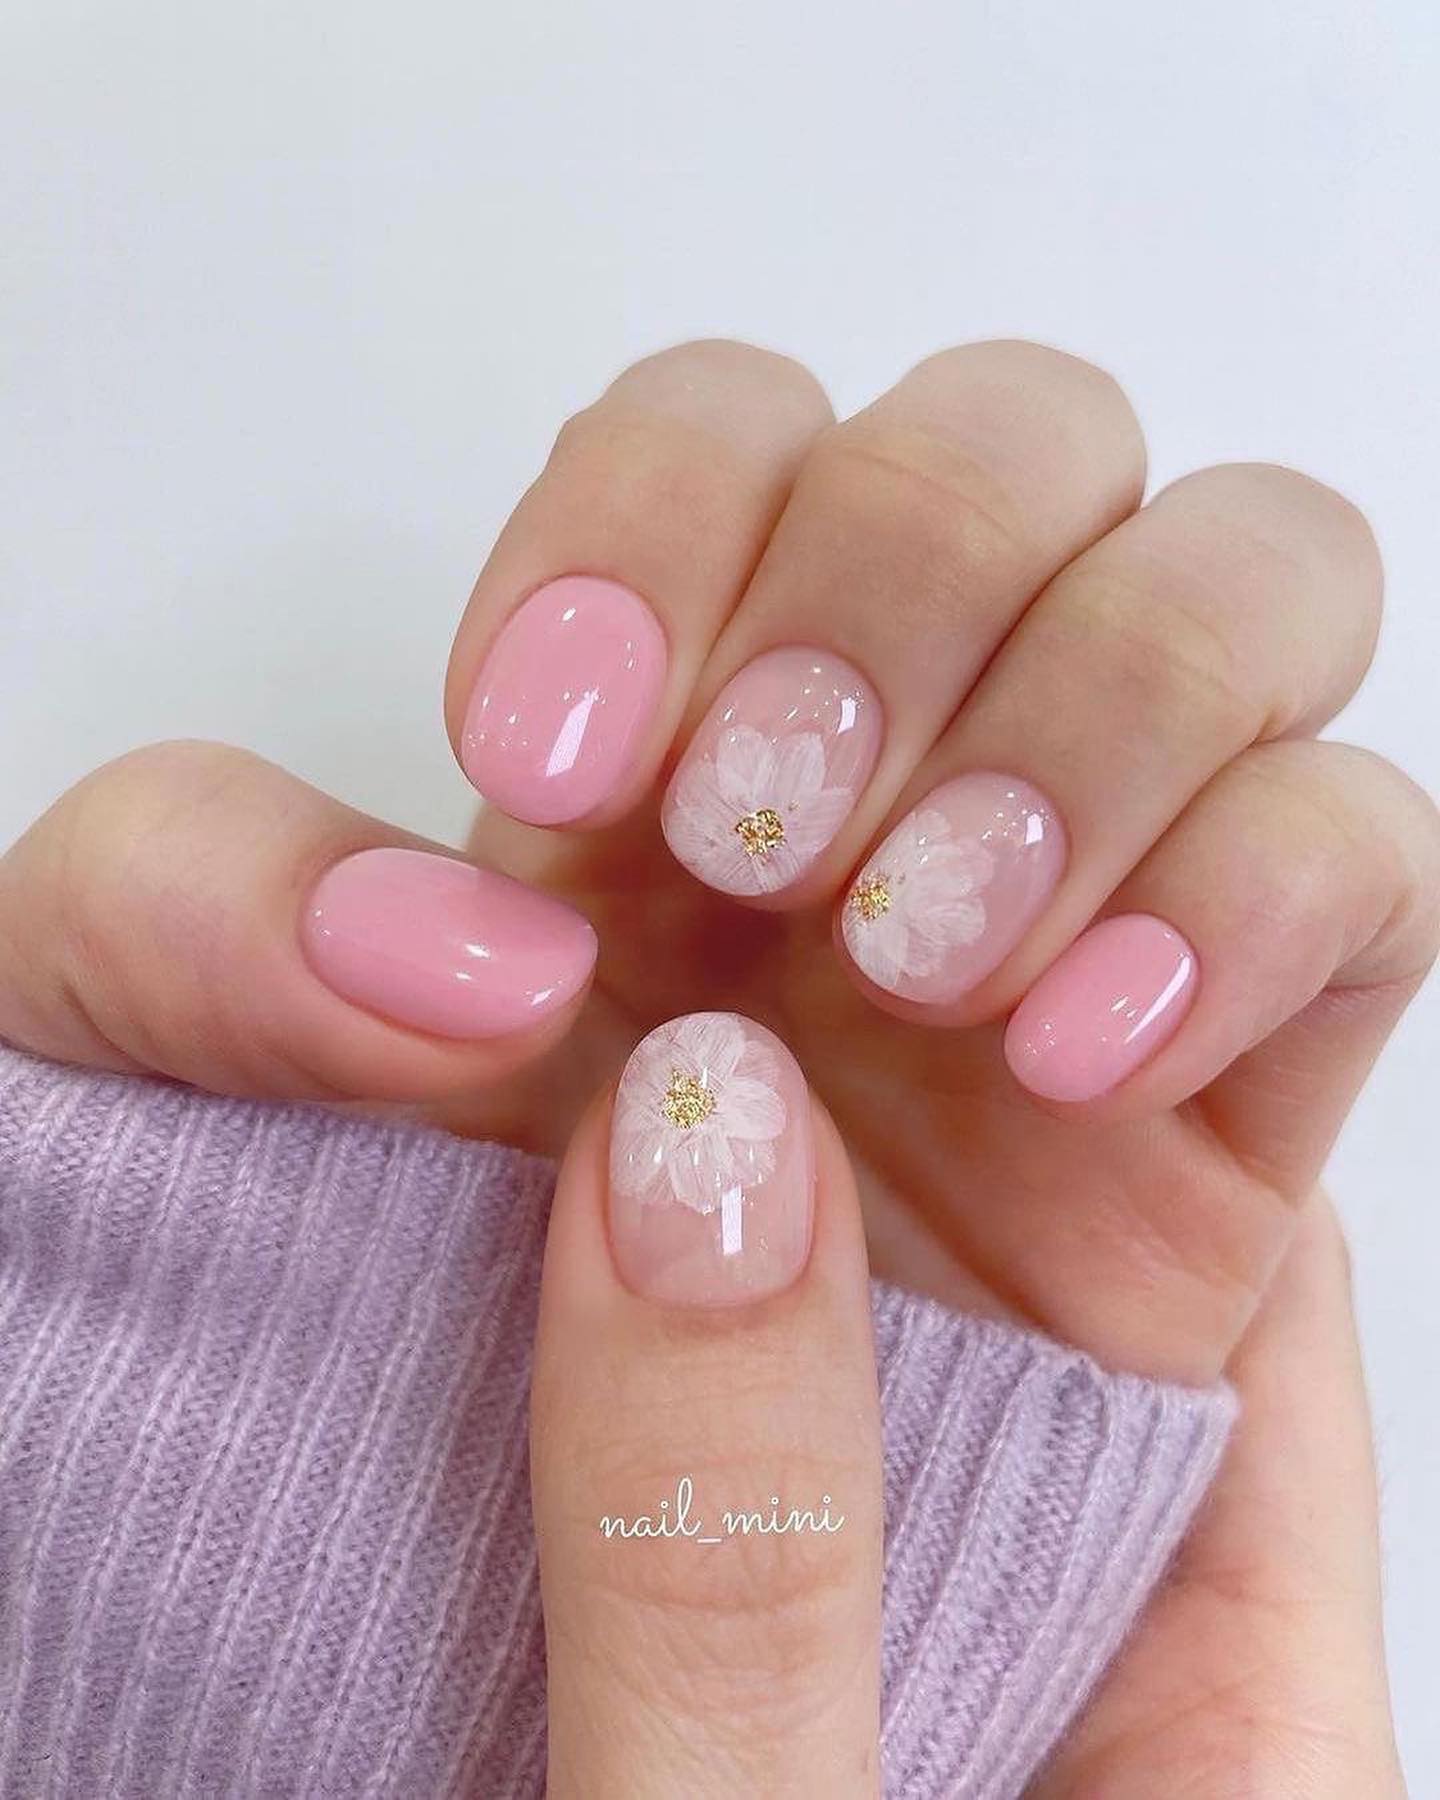 100 Pretty Spring Nail Designs To Try This Year images 29